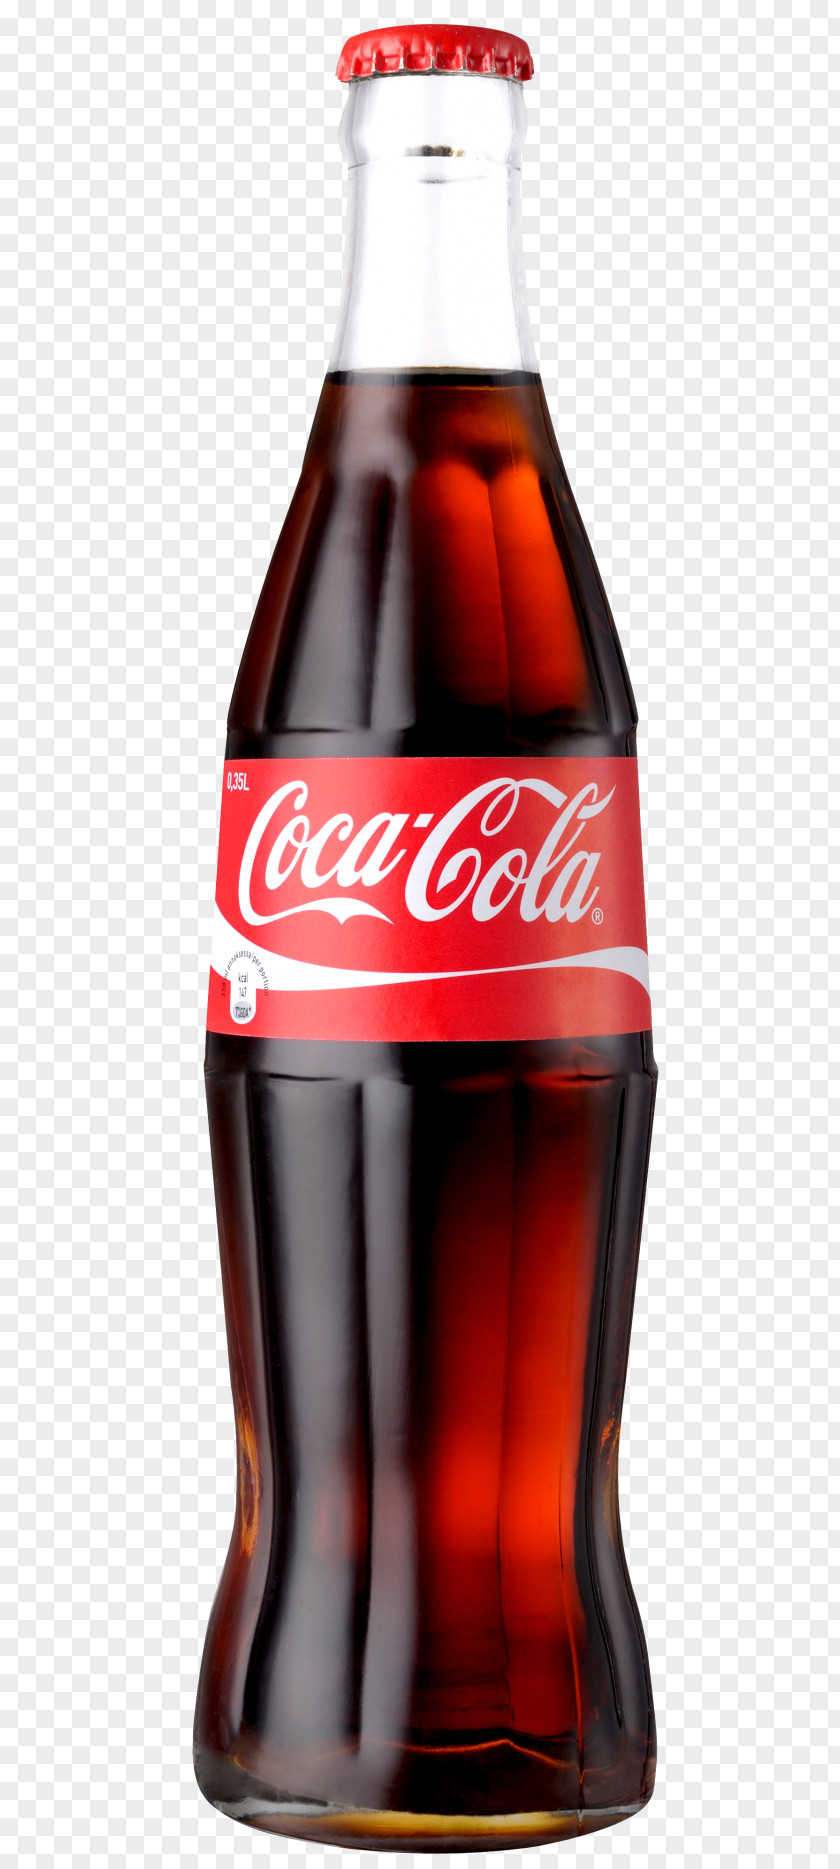 Coca Cola Image World Of Coca-Cola Fizzy Drinks Green Bottles PNG